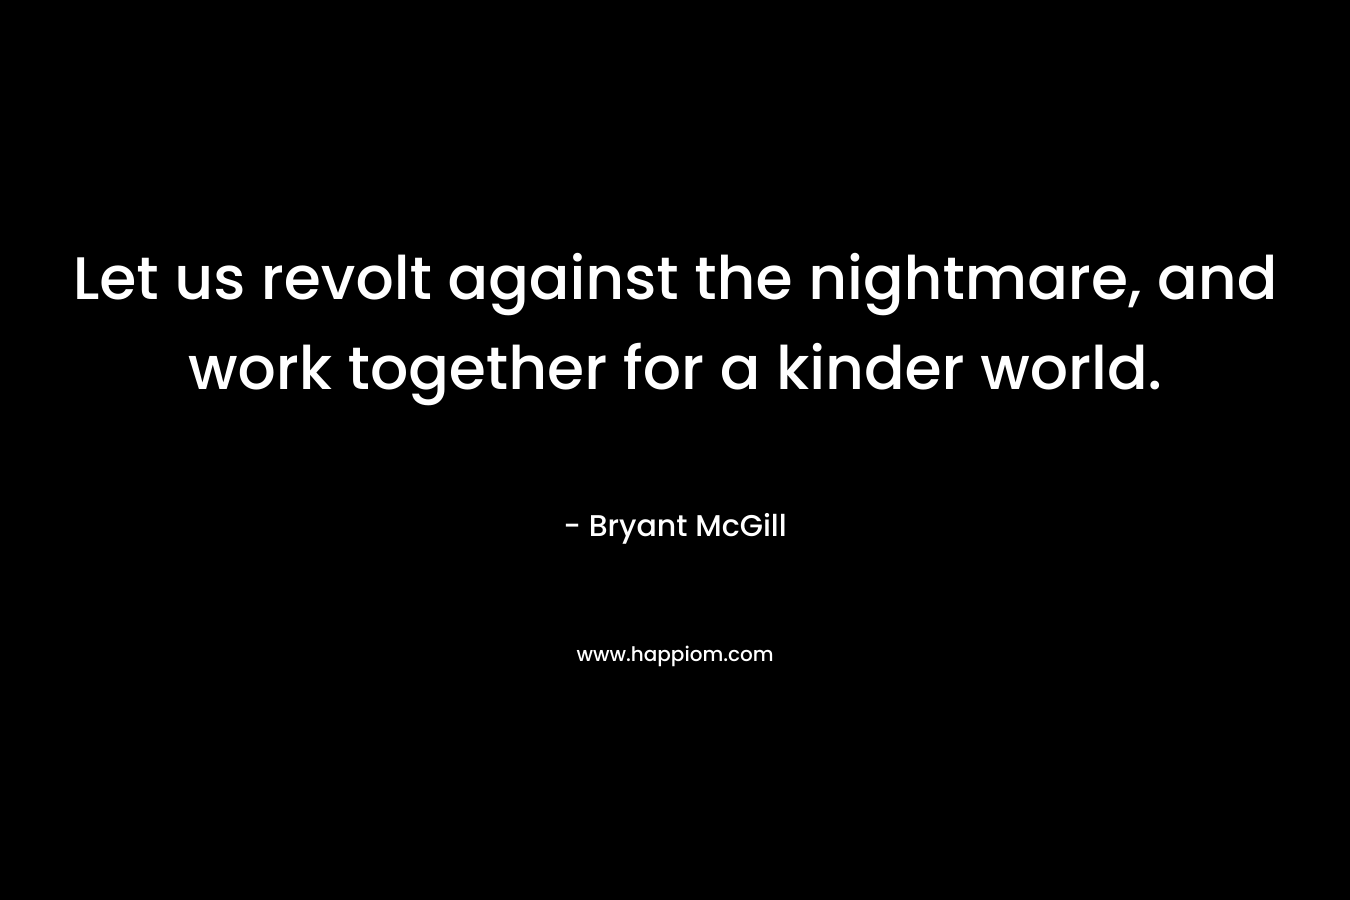 Let us revolt against the nightmare, and work together for a kinder world. – Bryant McGill